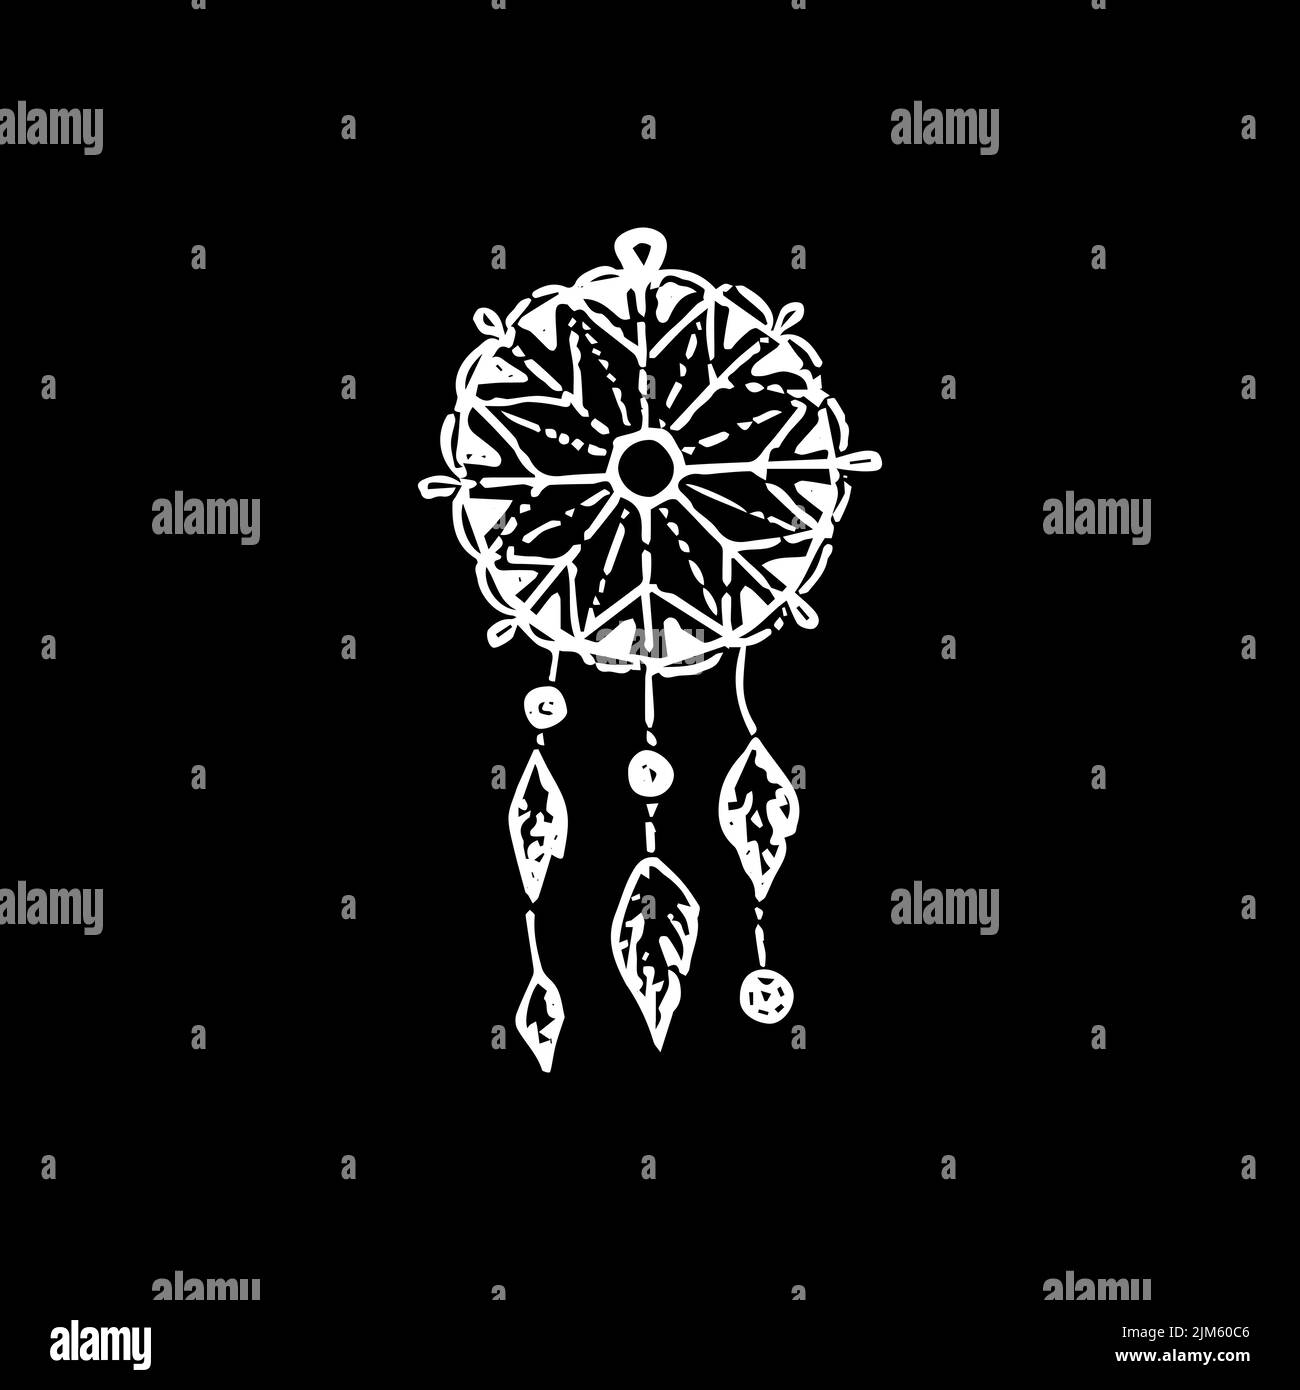 Dreamcatcher Black Dotwork. Vector Illustration of Hand Drawn Objects. Stock Vector